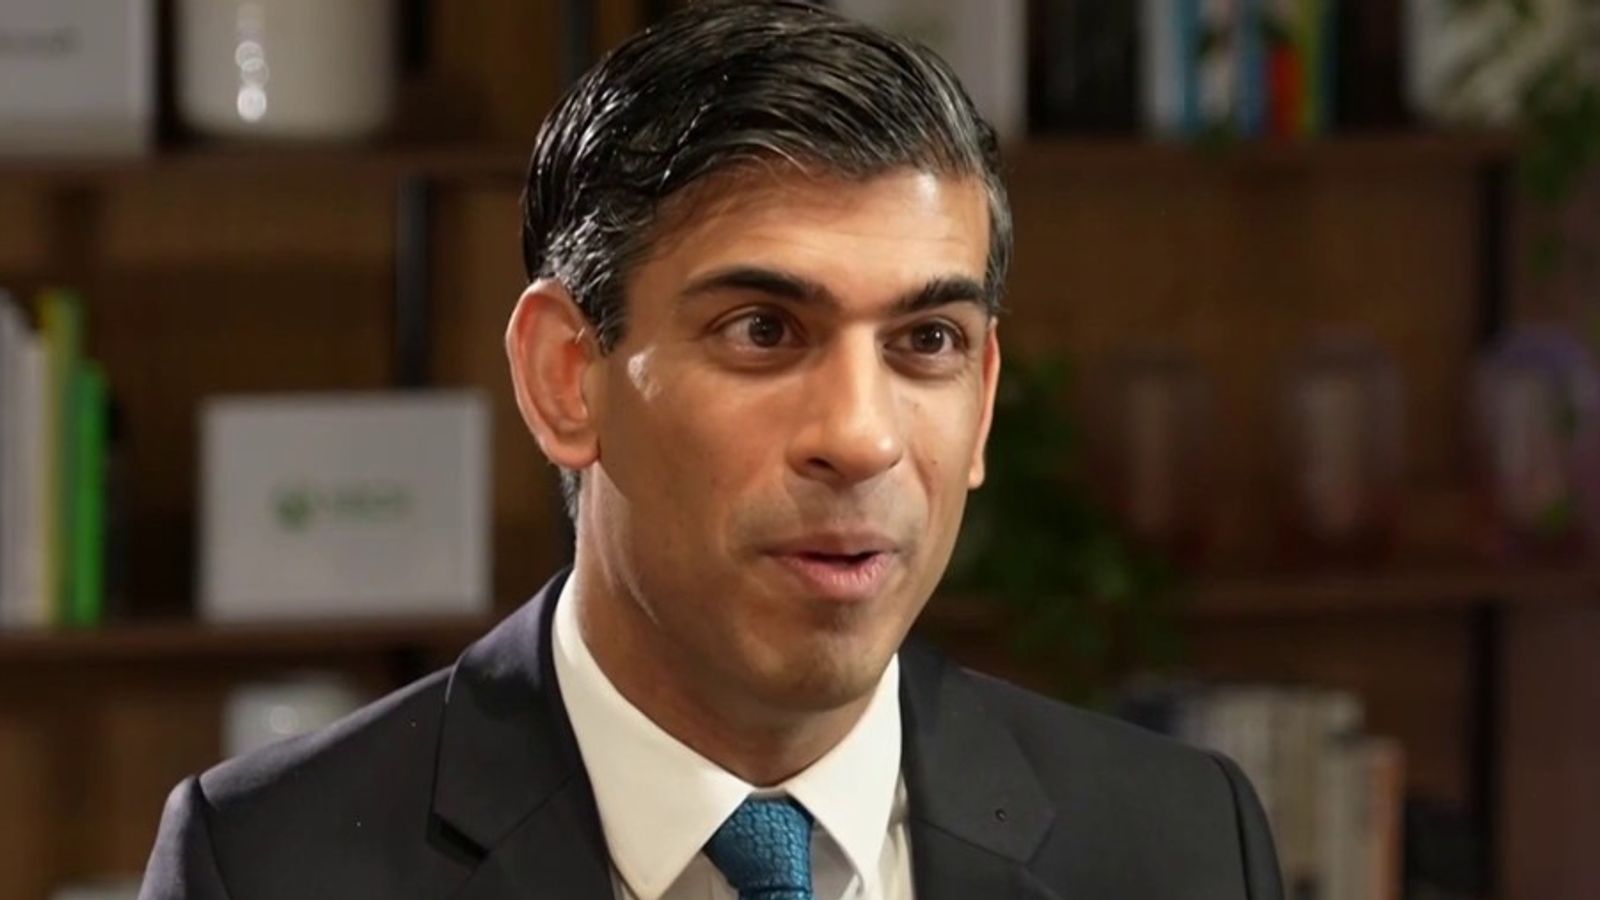 Rishi Sunak to launch an NFT issued by the Royal Mint to help make UK 'global cryptoasset hub'